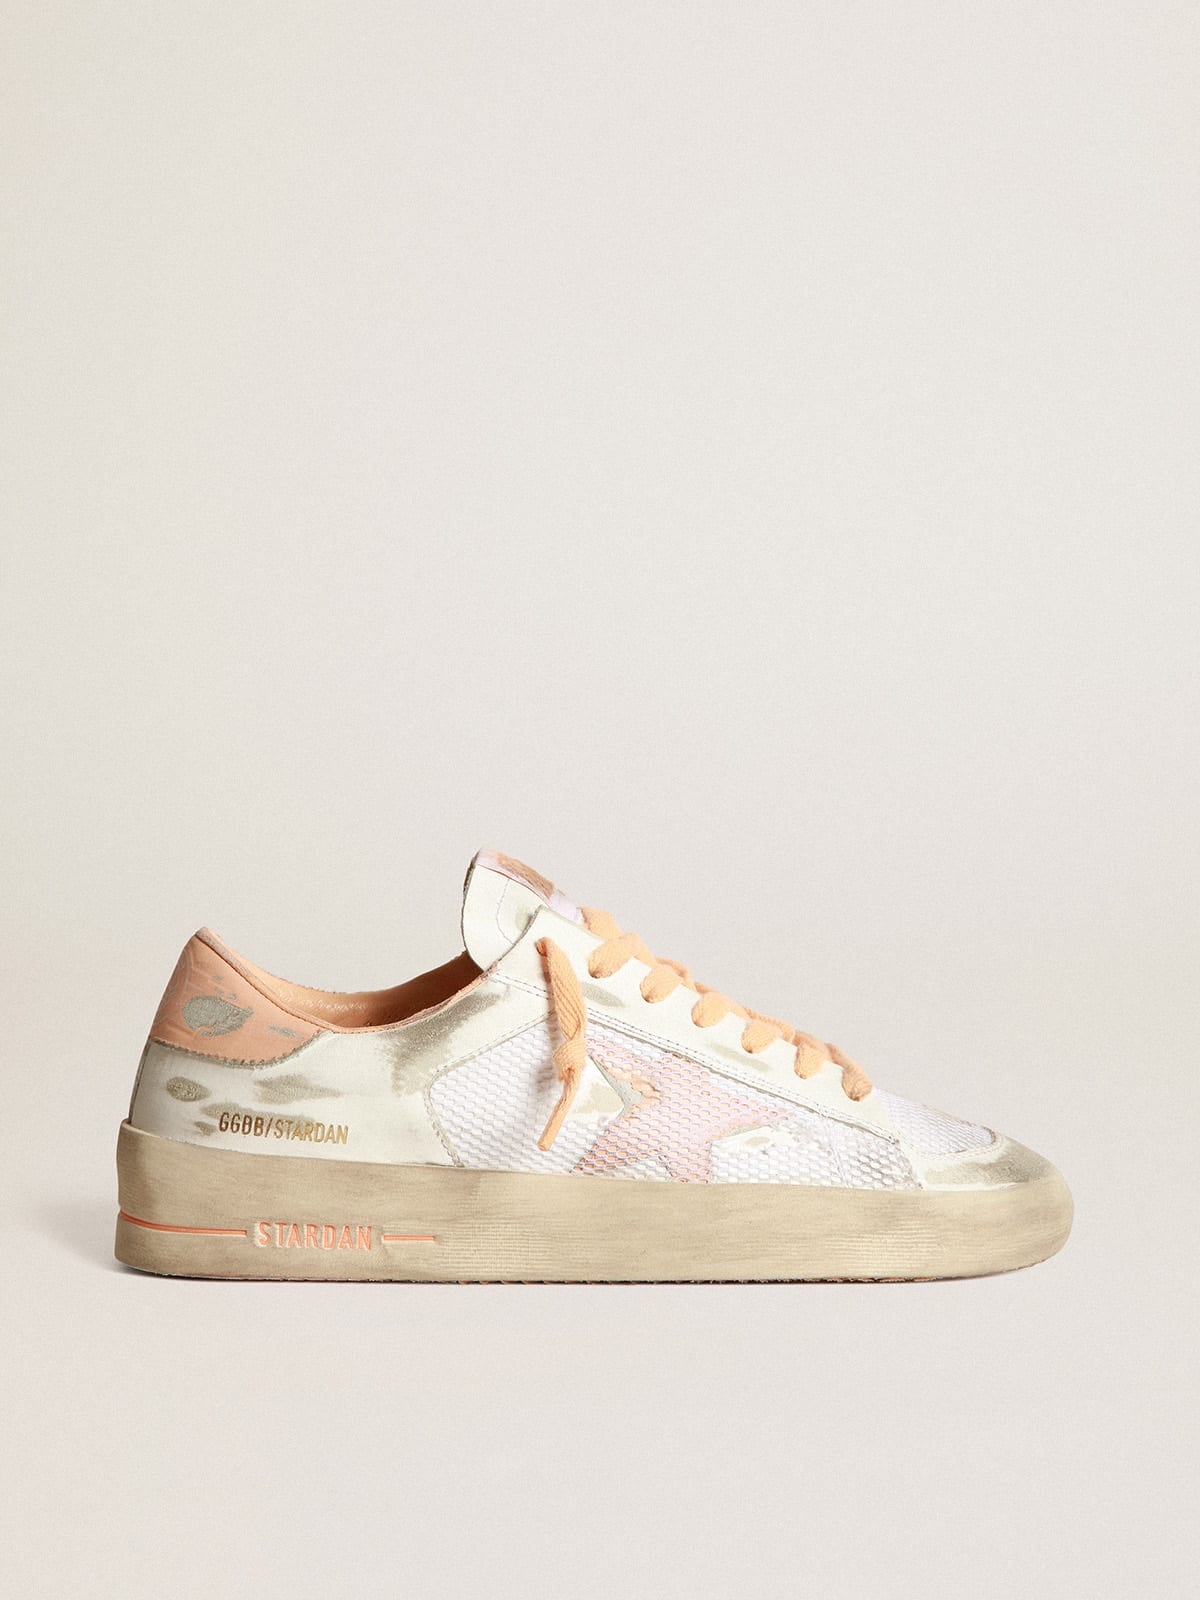 Stardan sneakers in white leather and mesh with peach-pink leather star and heel tab